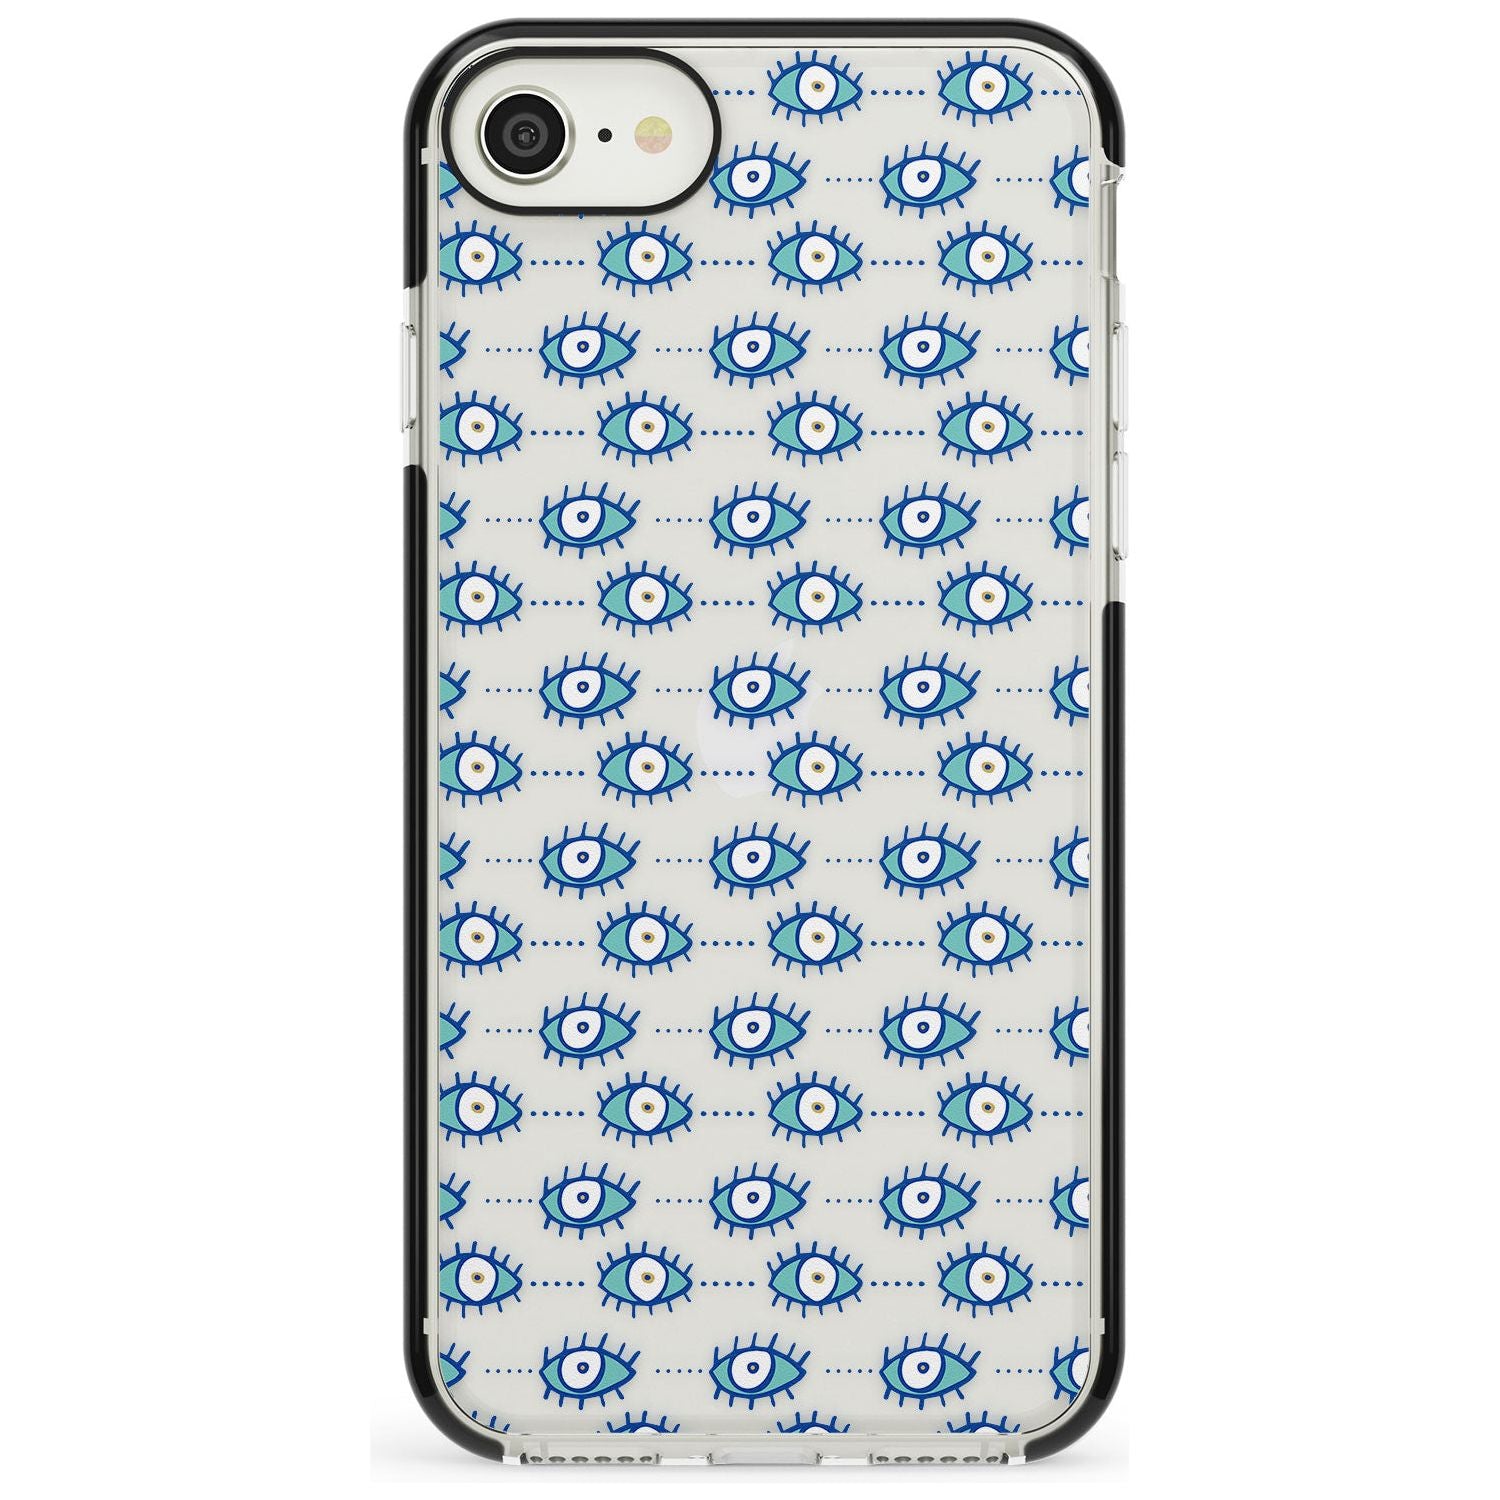 Crazy Eyes (Clear) Psychedelic Eyes Pattern Black Impact Phone Case for iPhone SE 8 7 Plus